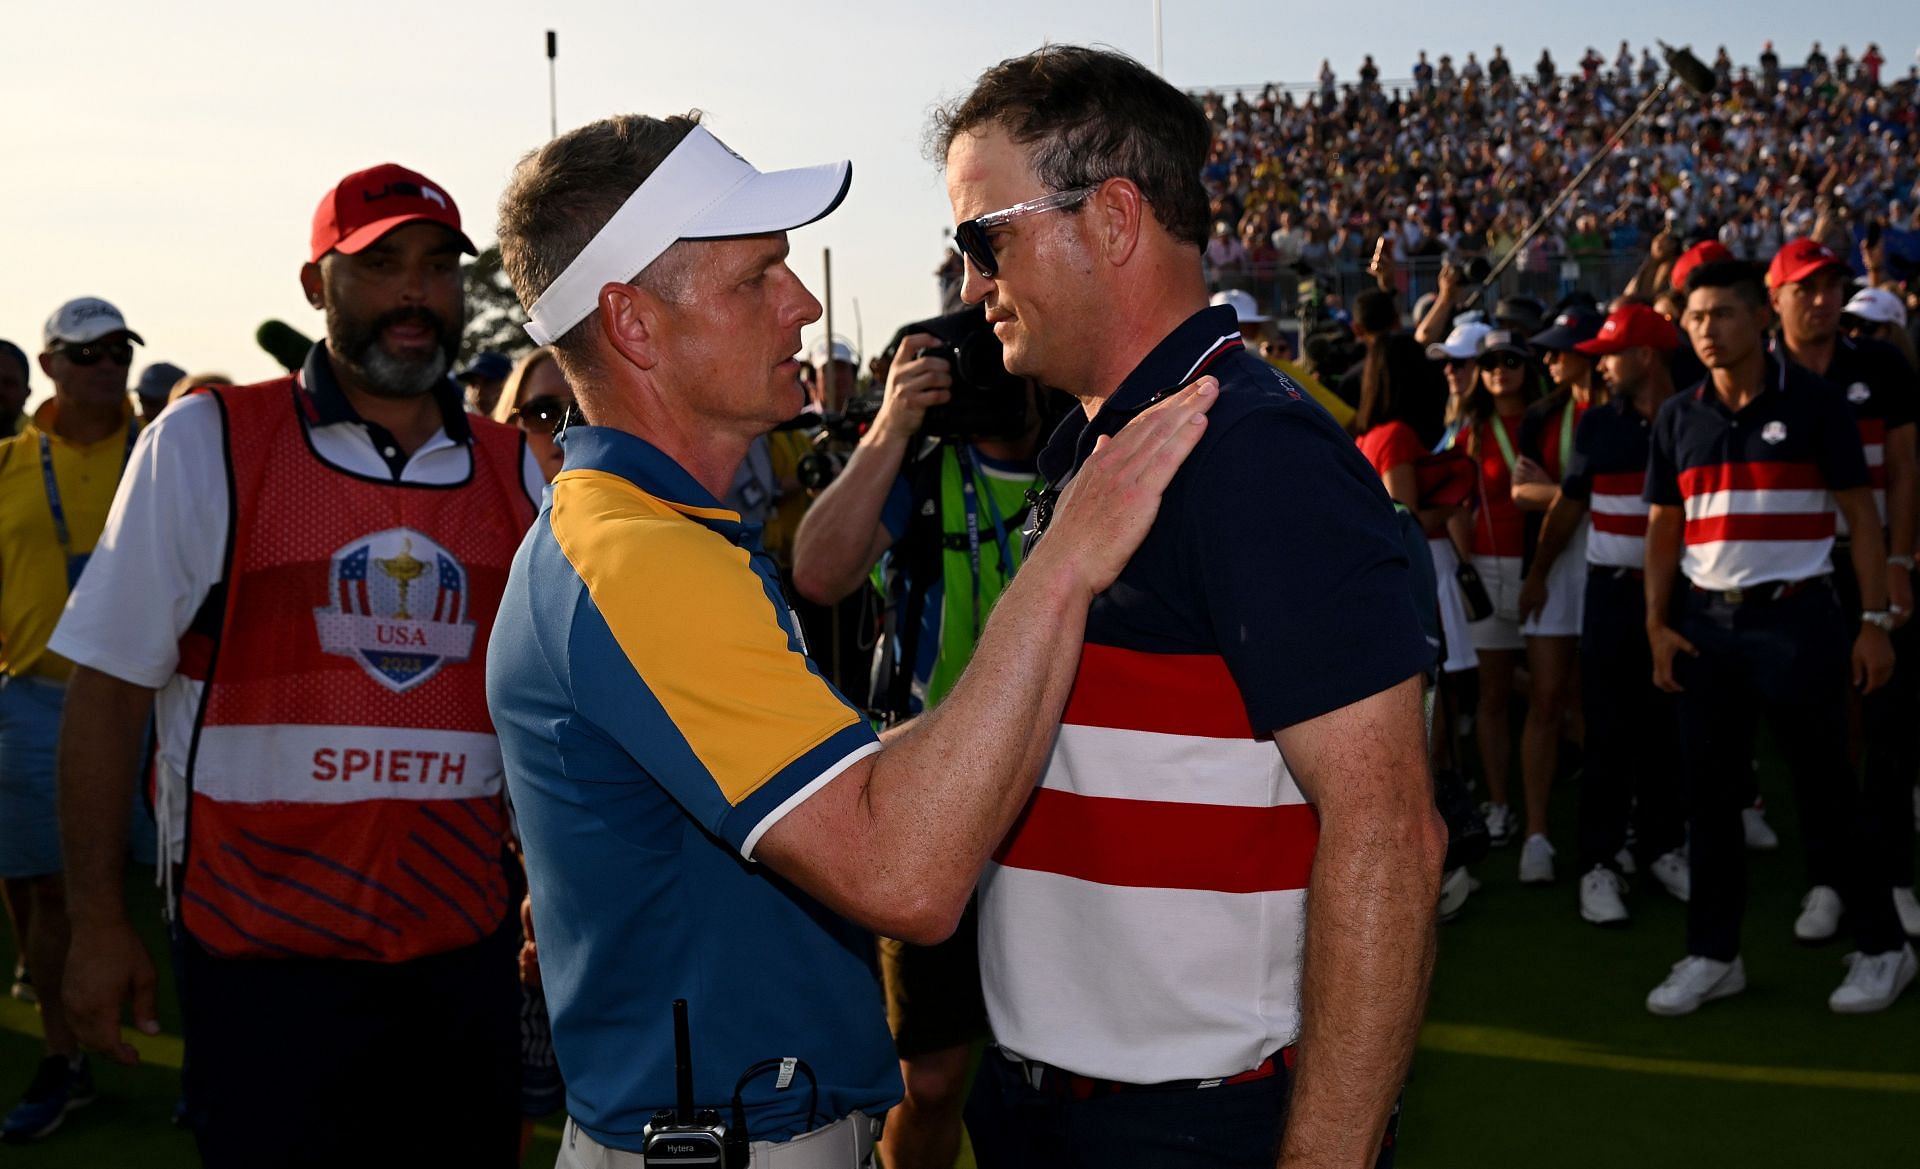 What went wrong at the Ryder Cup?